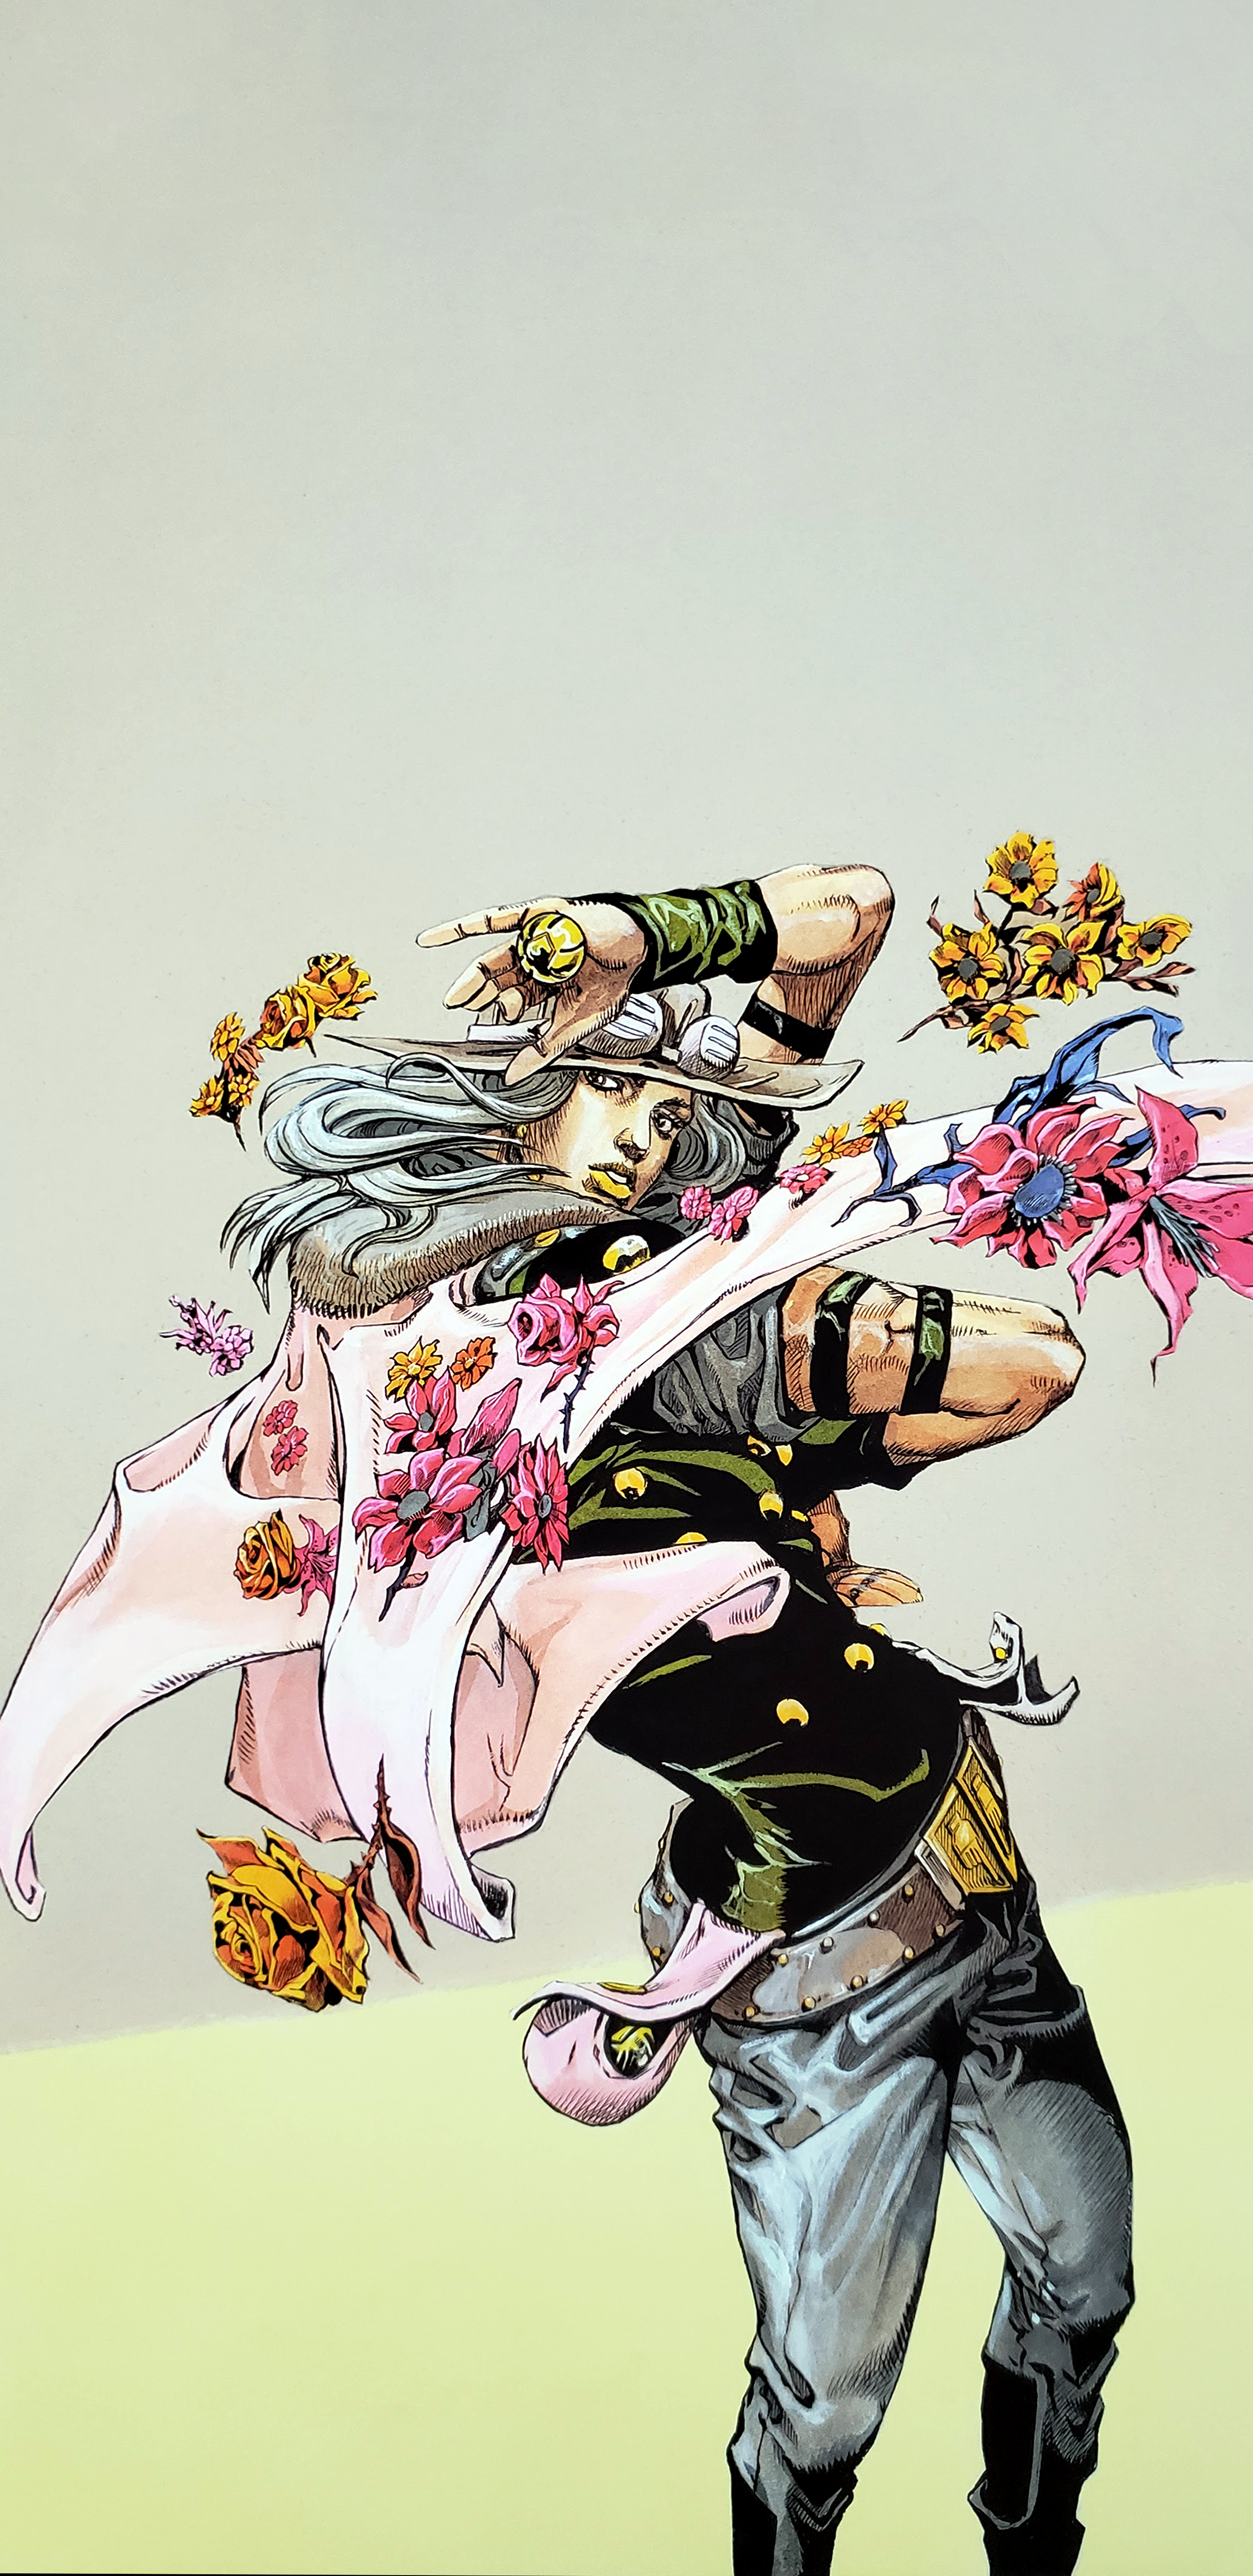 Posting a wallpaper a day until stone ocean is animated day 218: Gyro Zeppeli